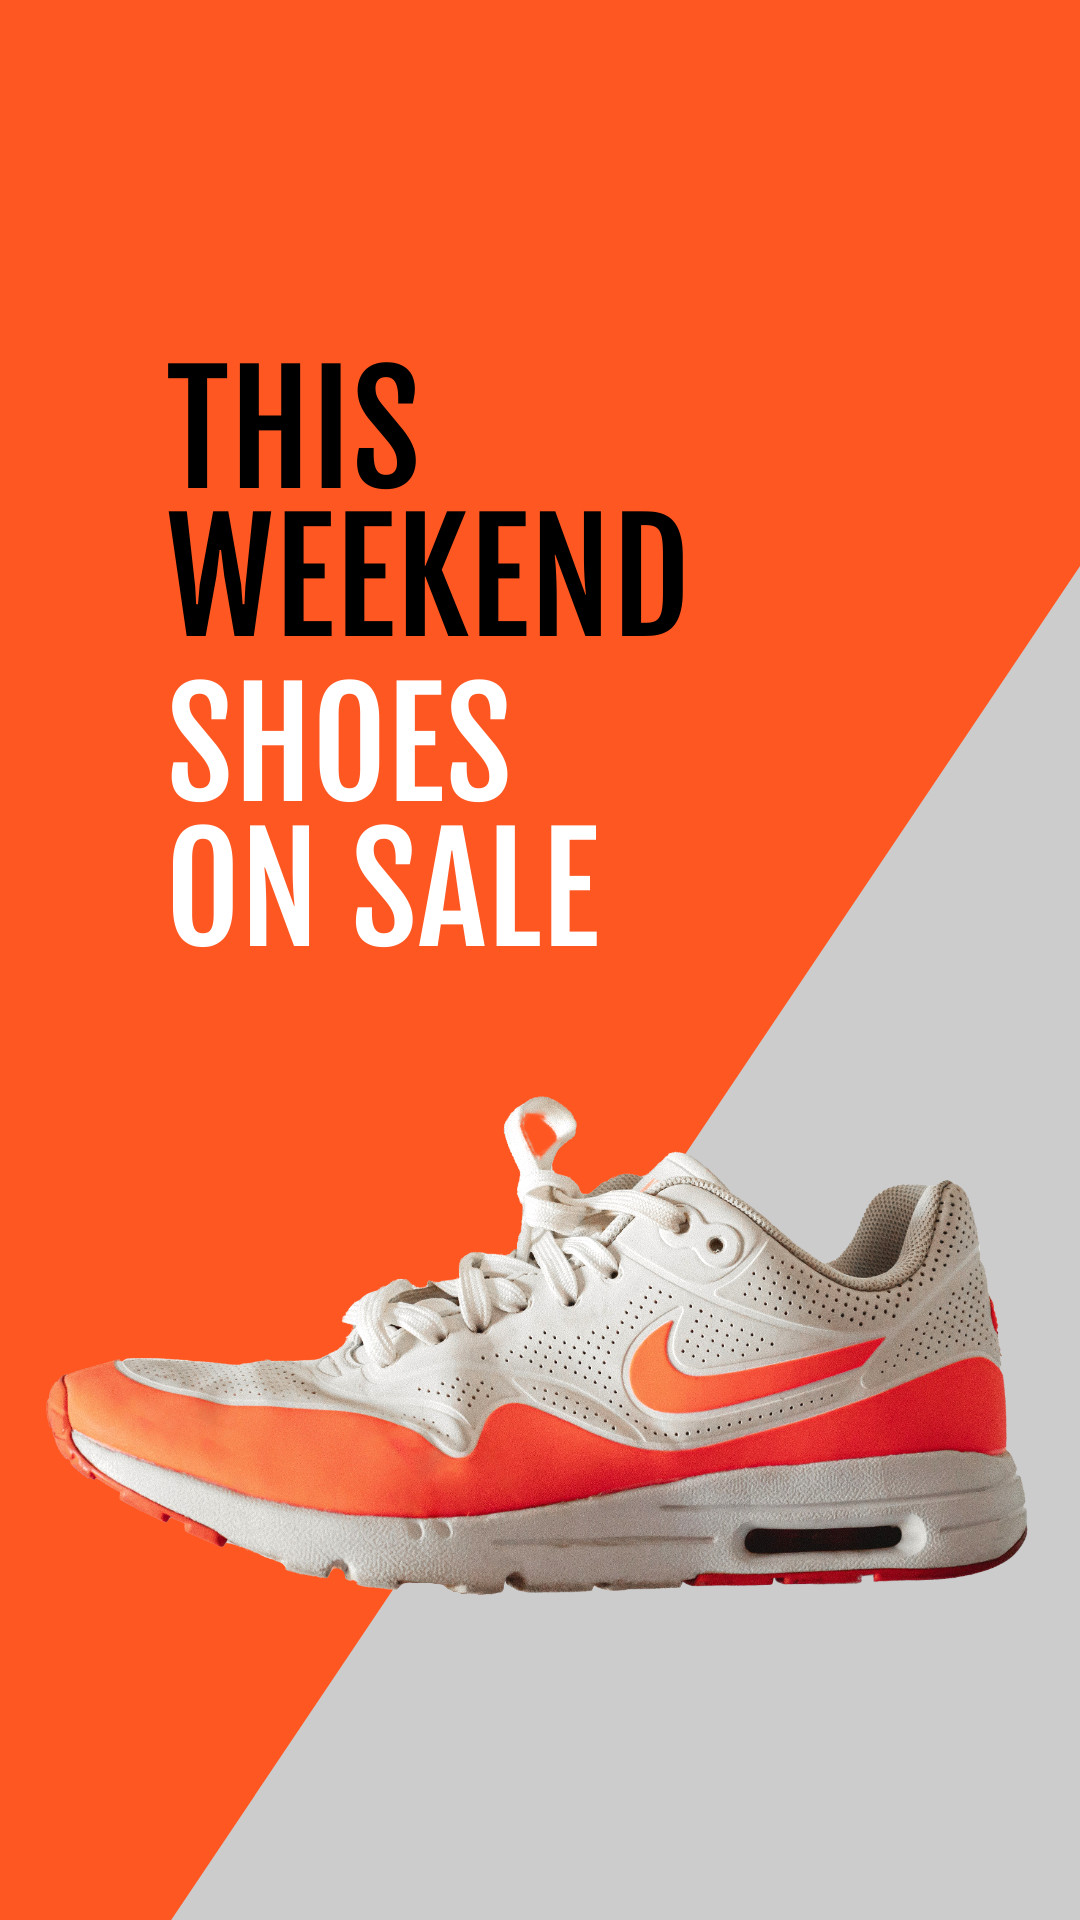 Orange Shoes on Sale This Weekend  Inline Rectangle 300x250